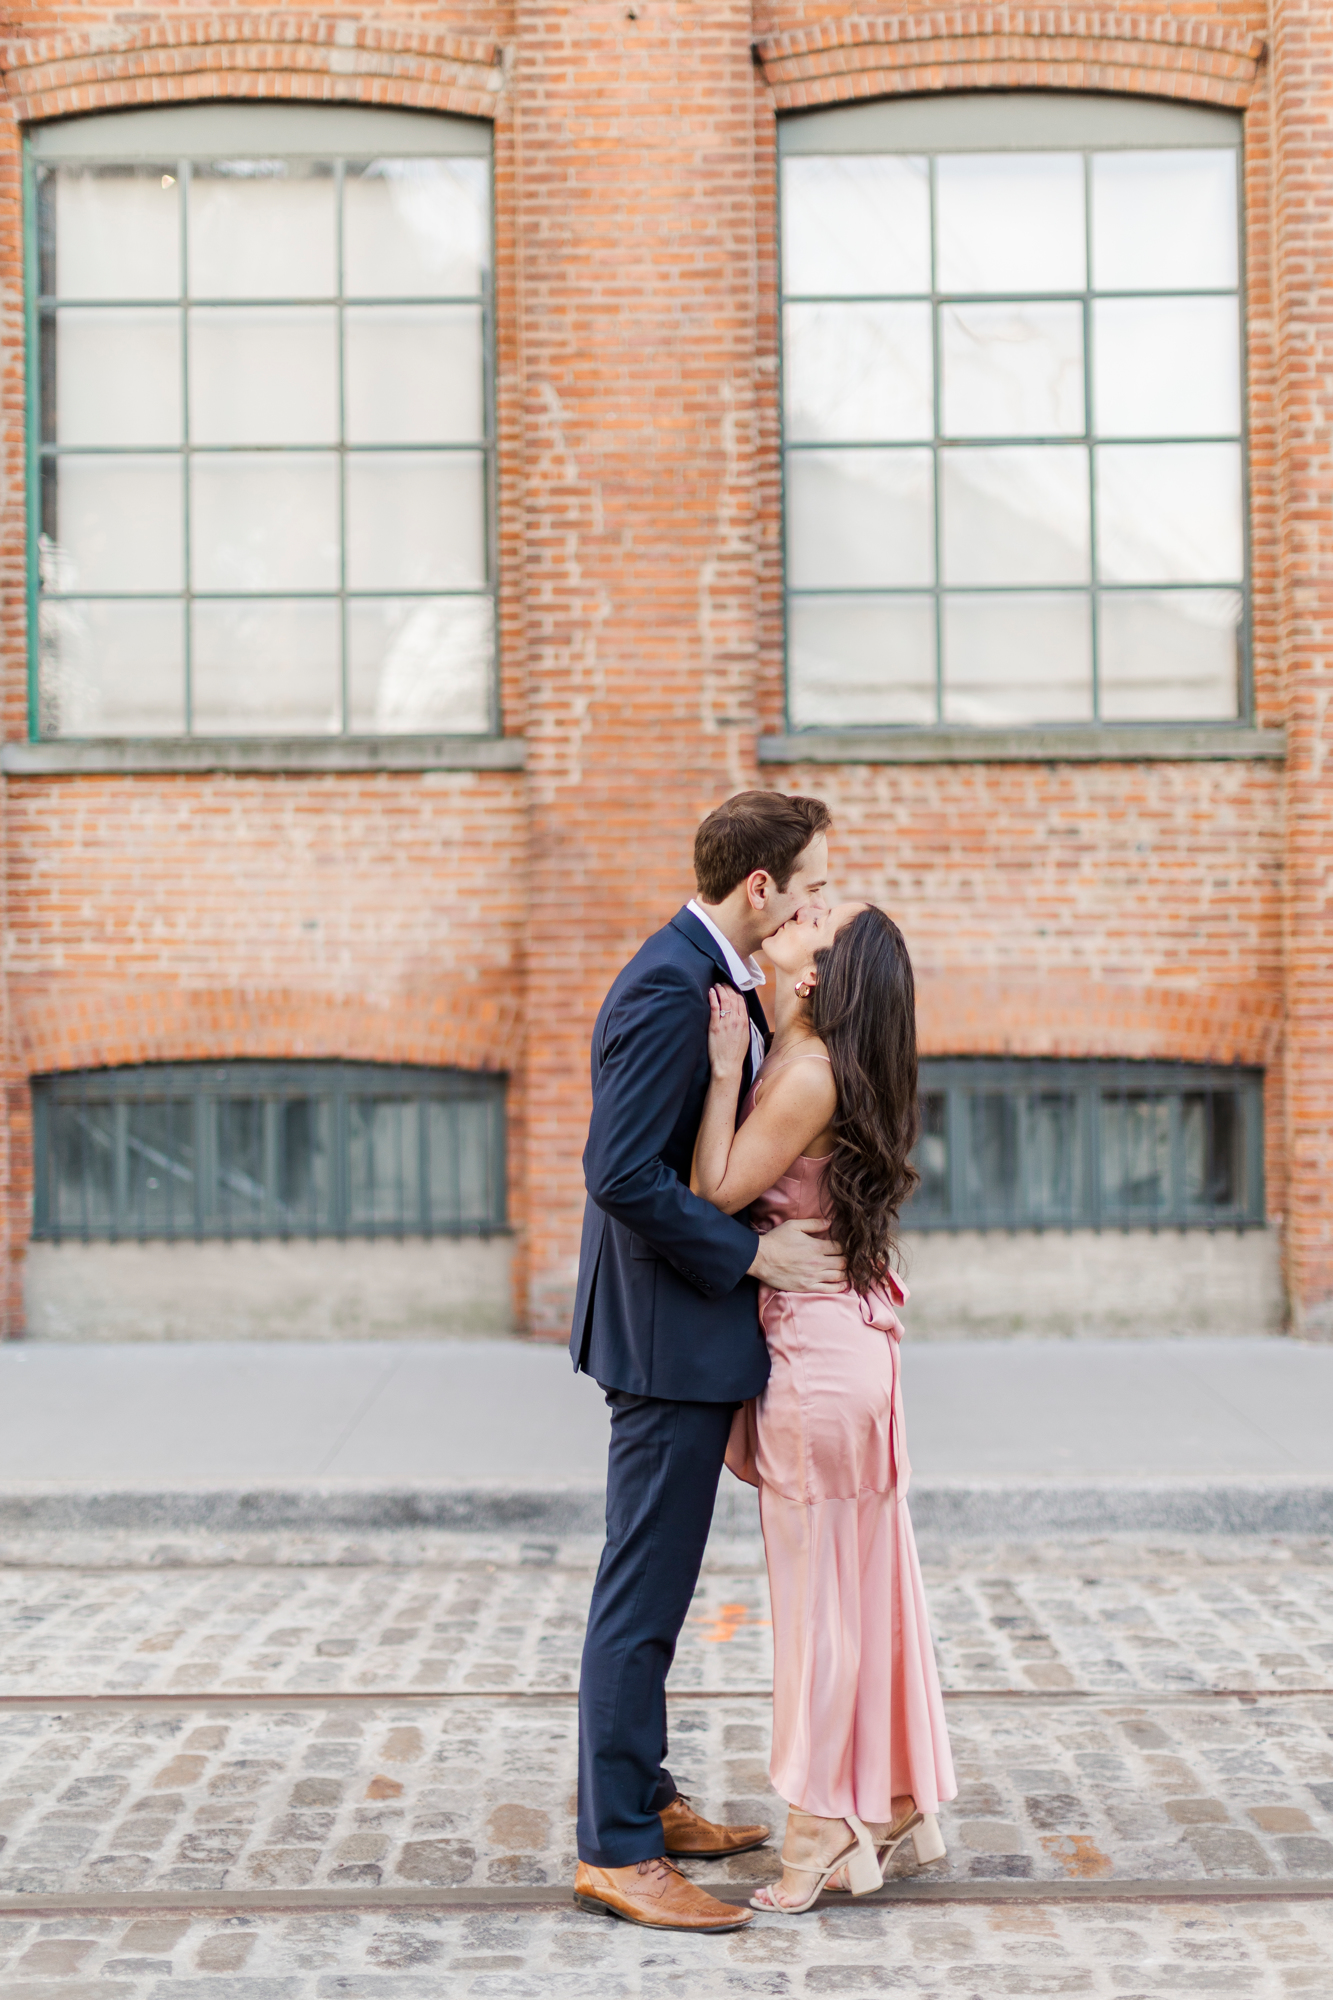 Magical Engagement Shoot in DUMBO